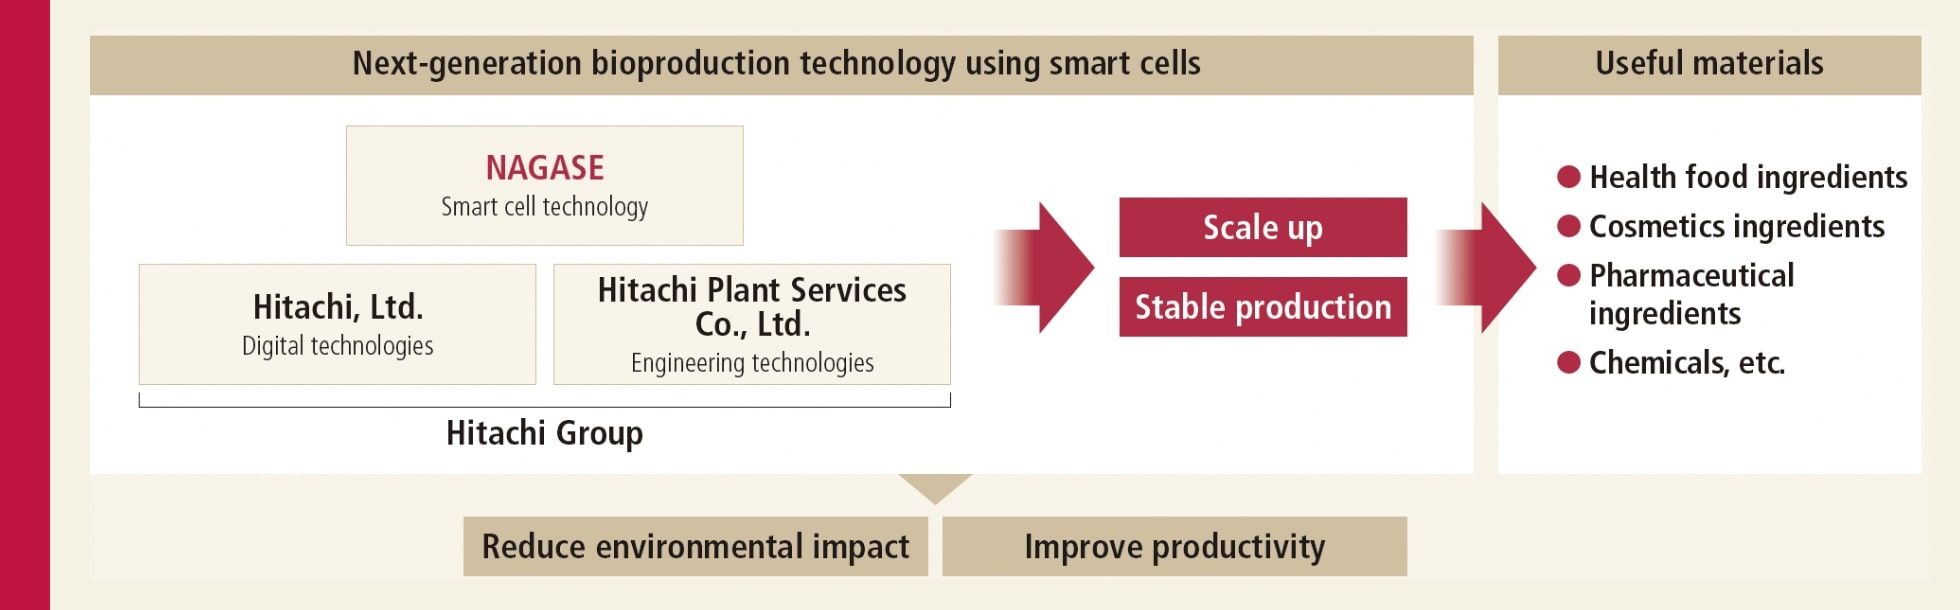 NAGASE's Growth Strategy Chart for Biotechnology